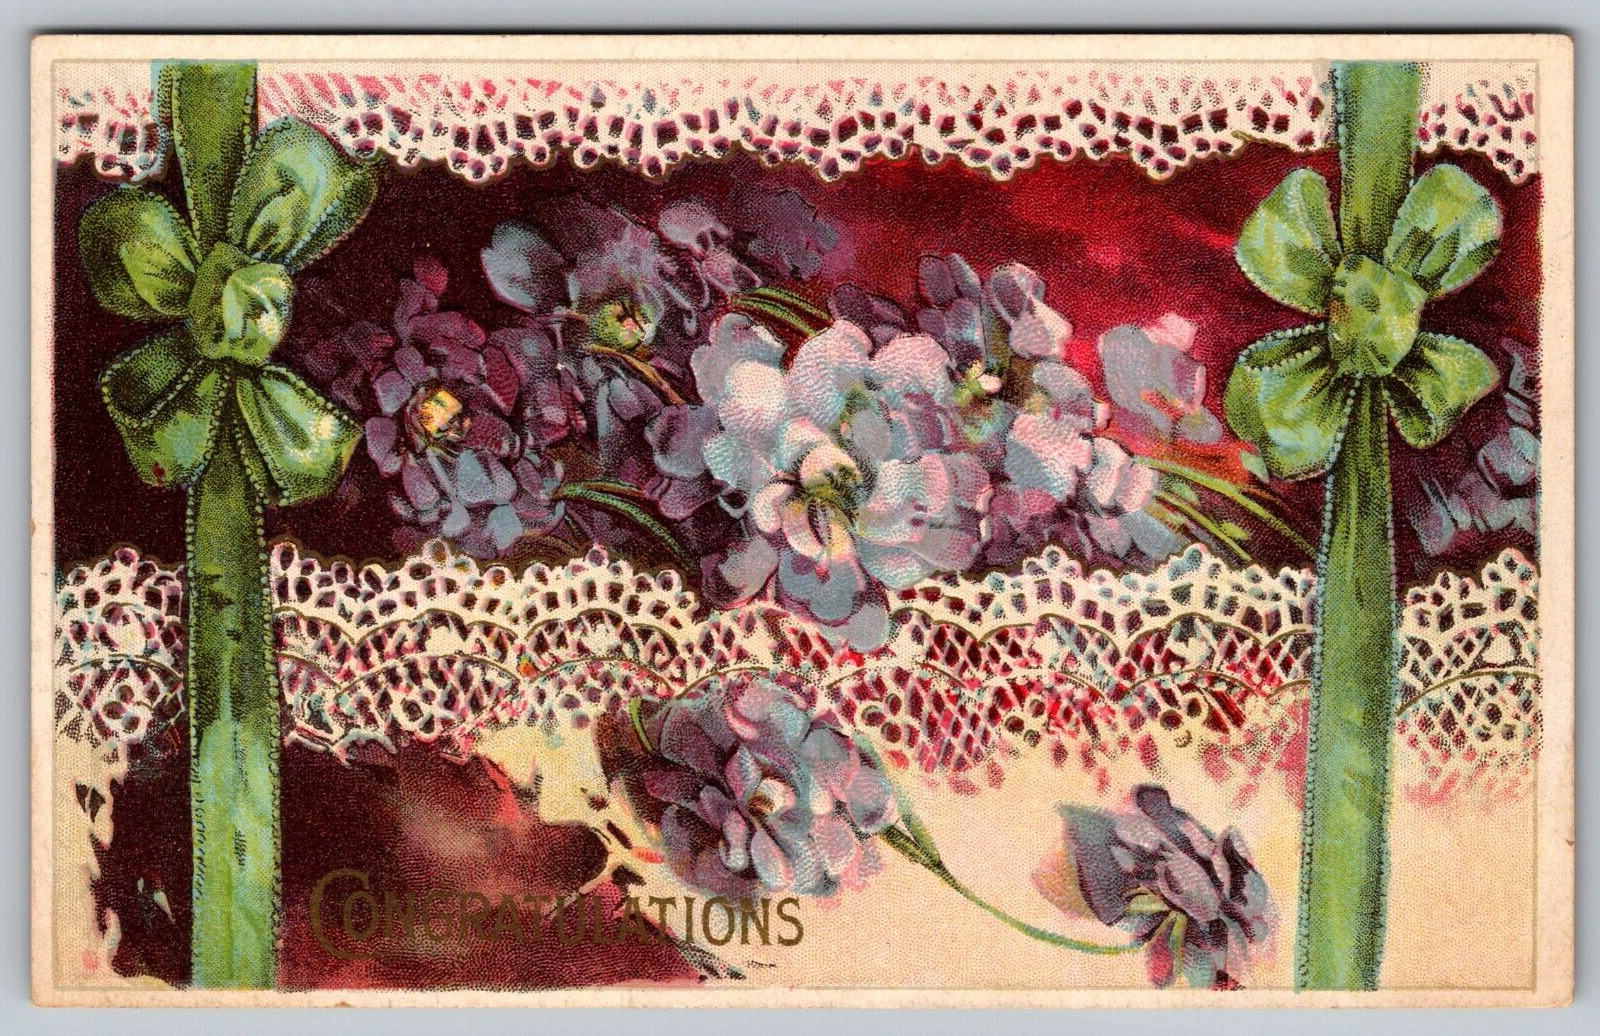 Postcard A Congratulations Greetings With Flowers Lace & Ribbons VTG   I5